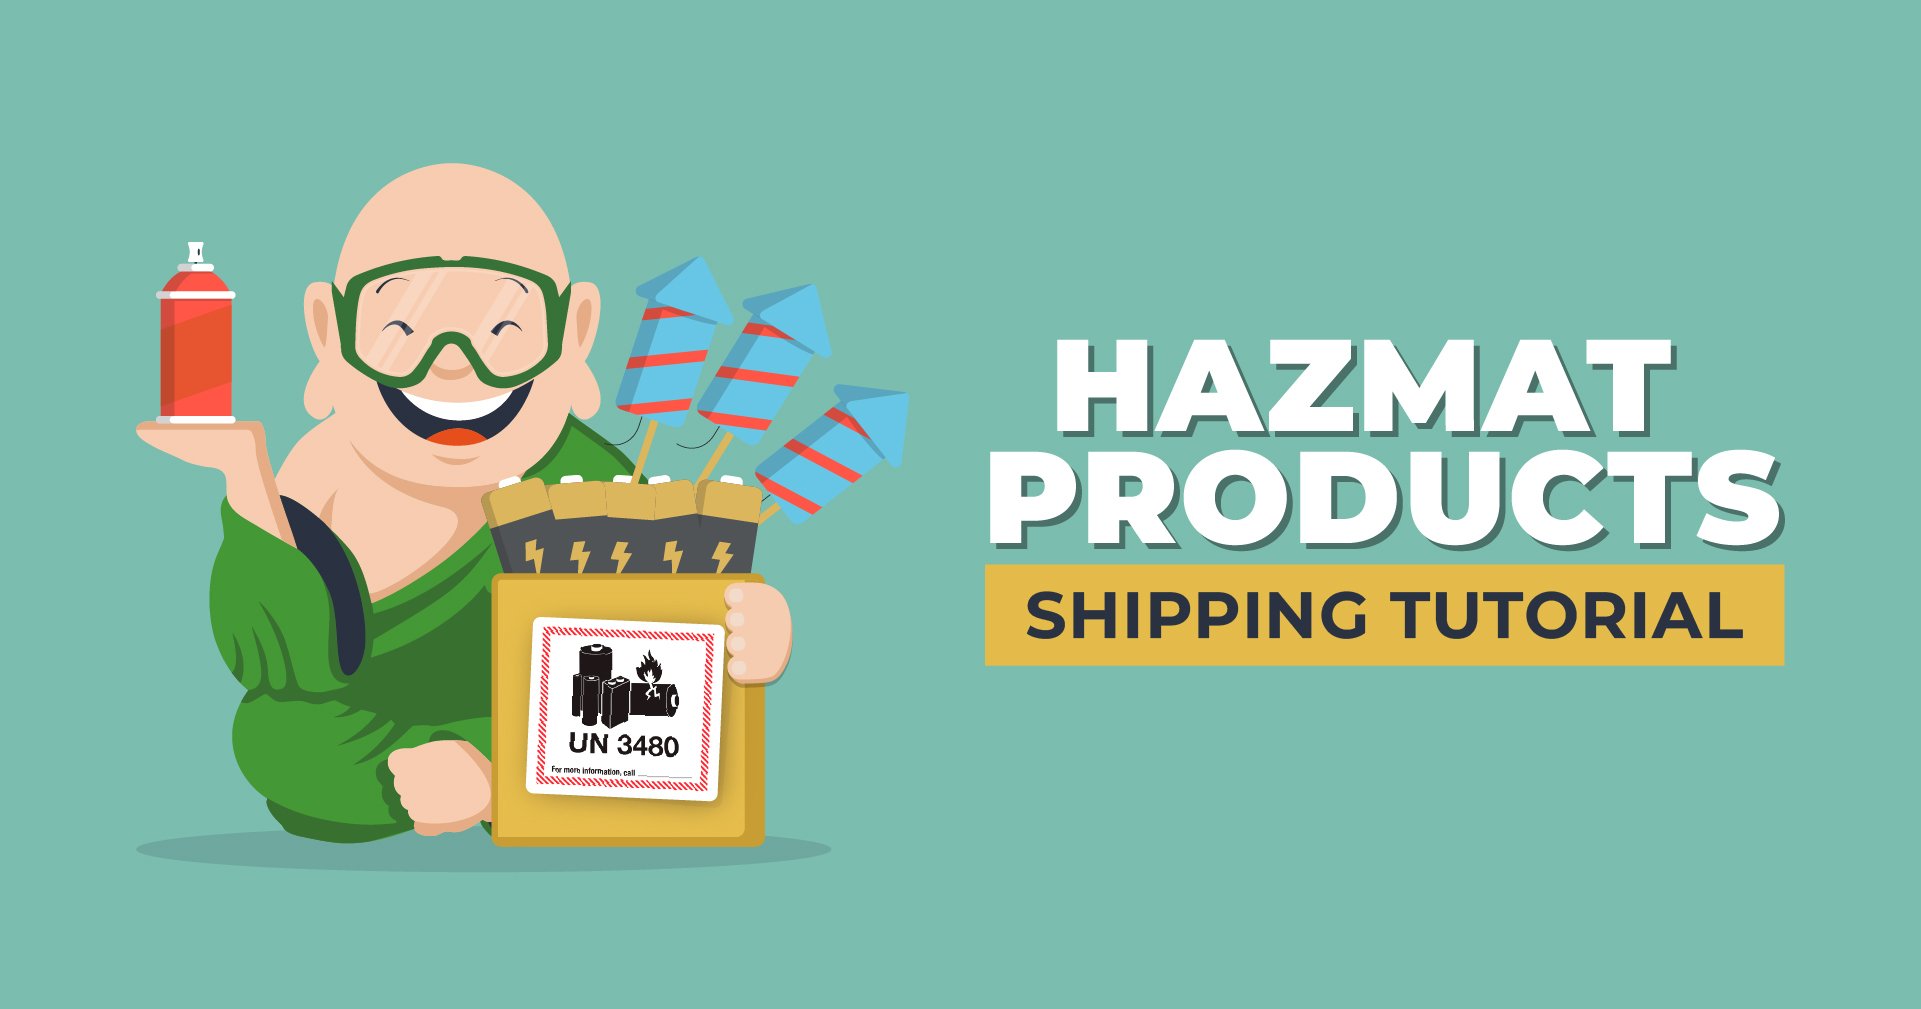 Hazmat Products Shipping Tutorial for Ecommerce Businesses